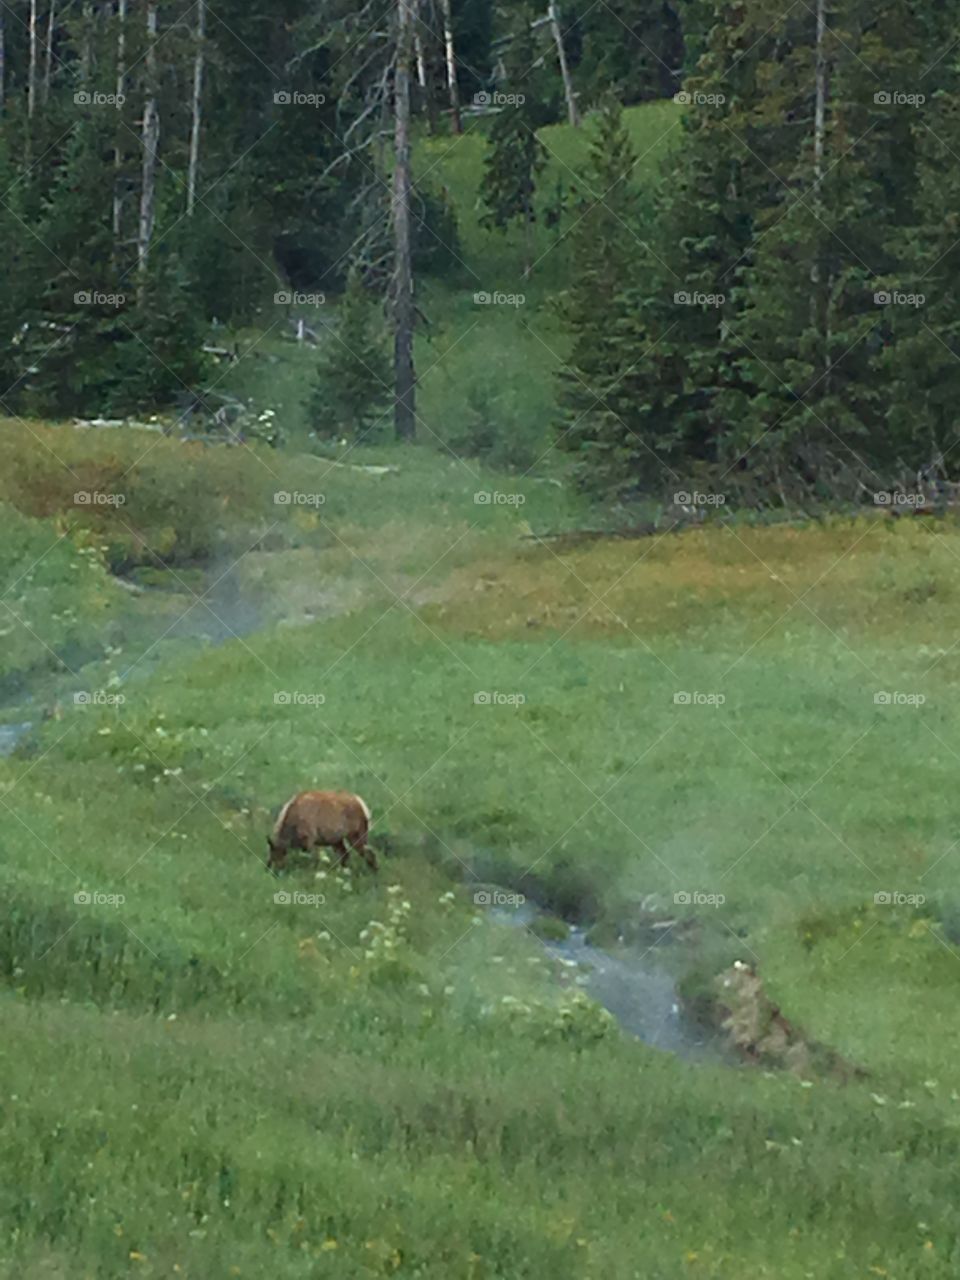 Elk grazing by hot spring-fed stream in Yellowstone National Park